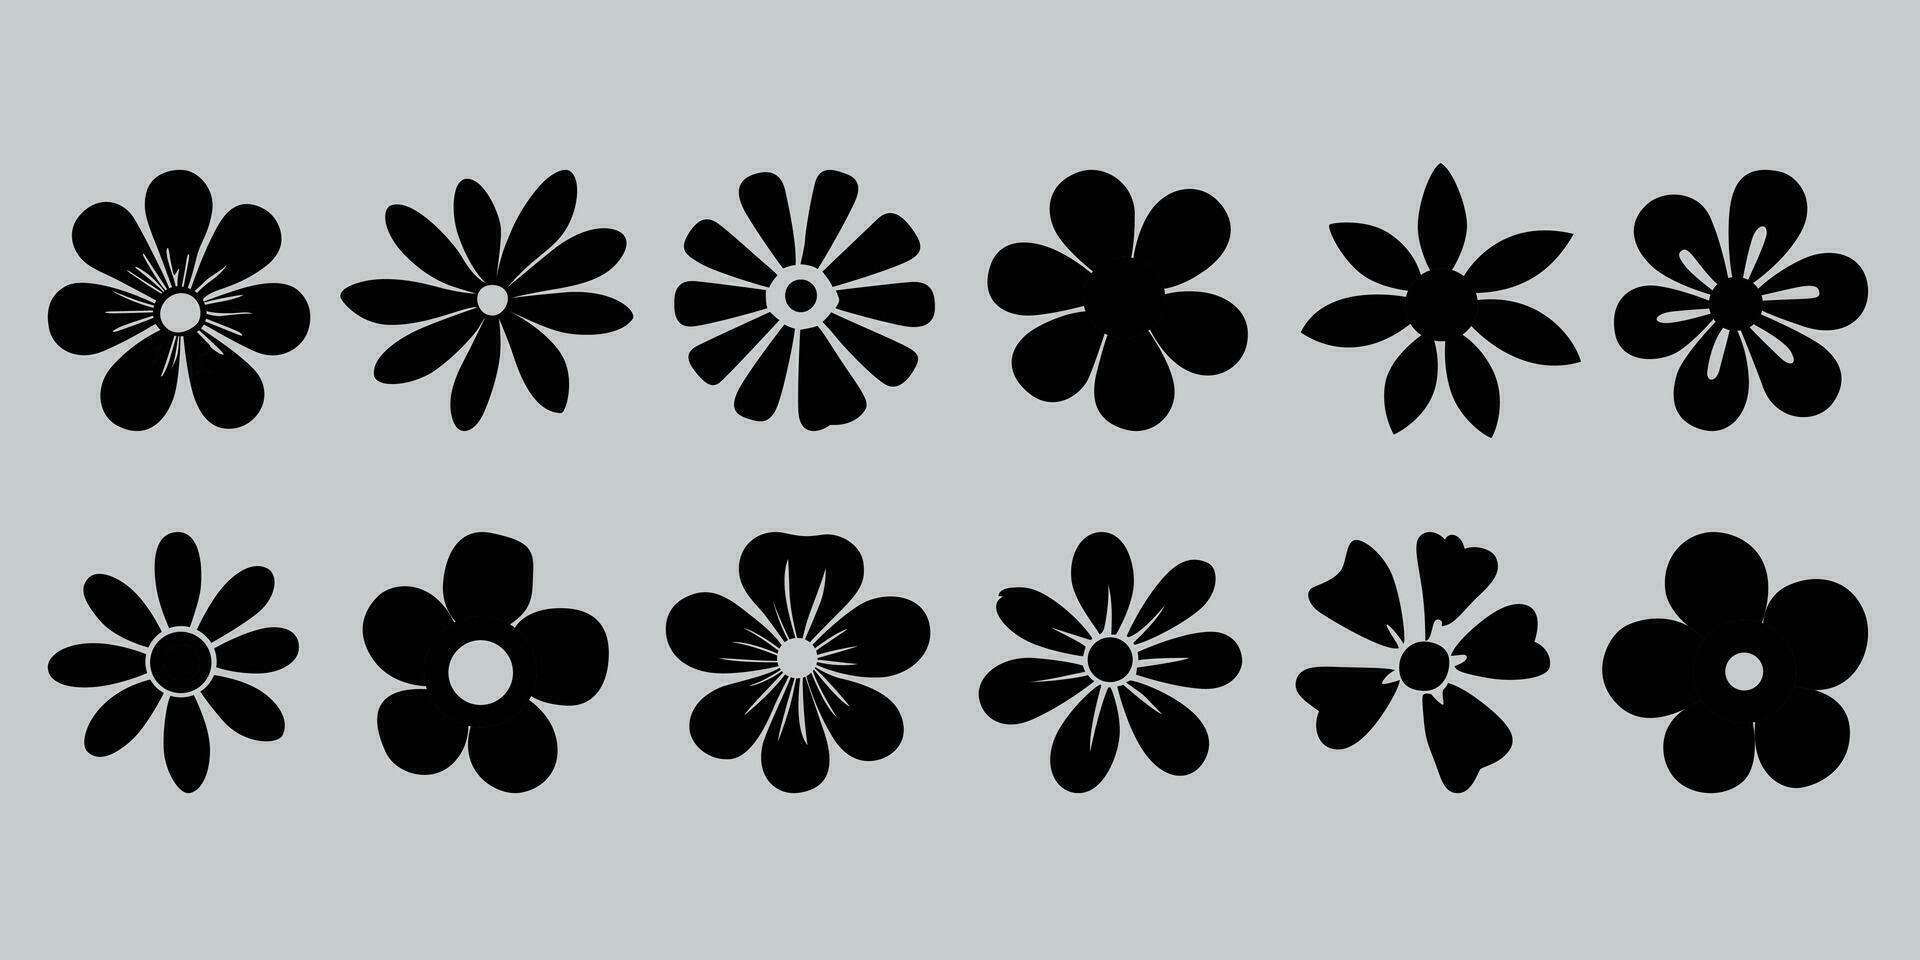 Simple flower vector icon collection, flat flower vector design,